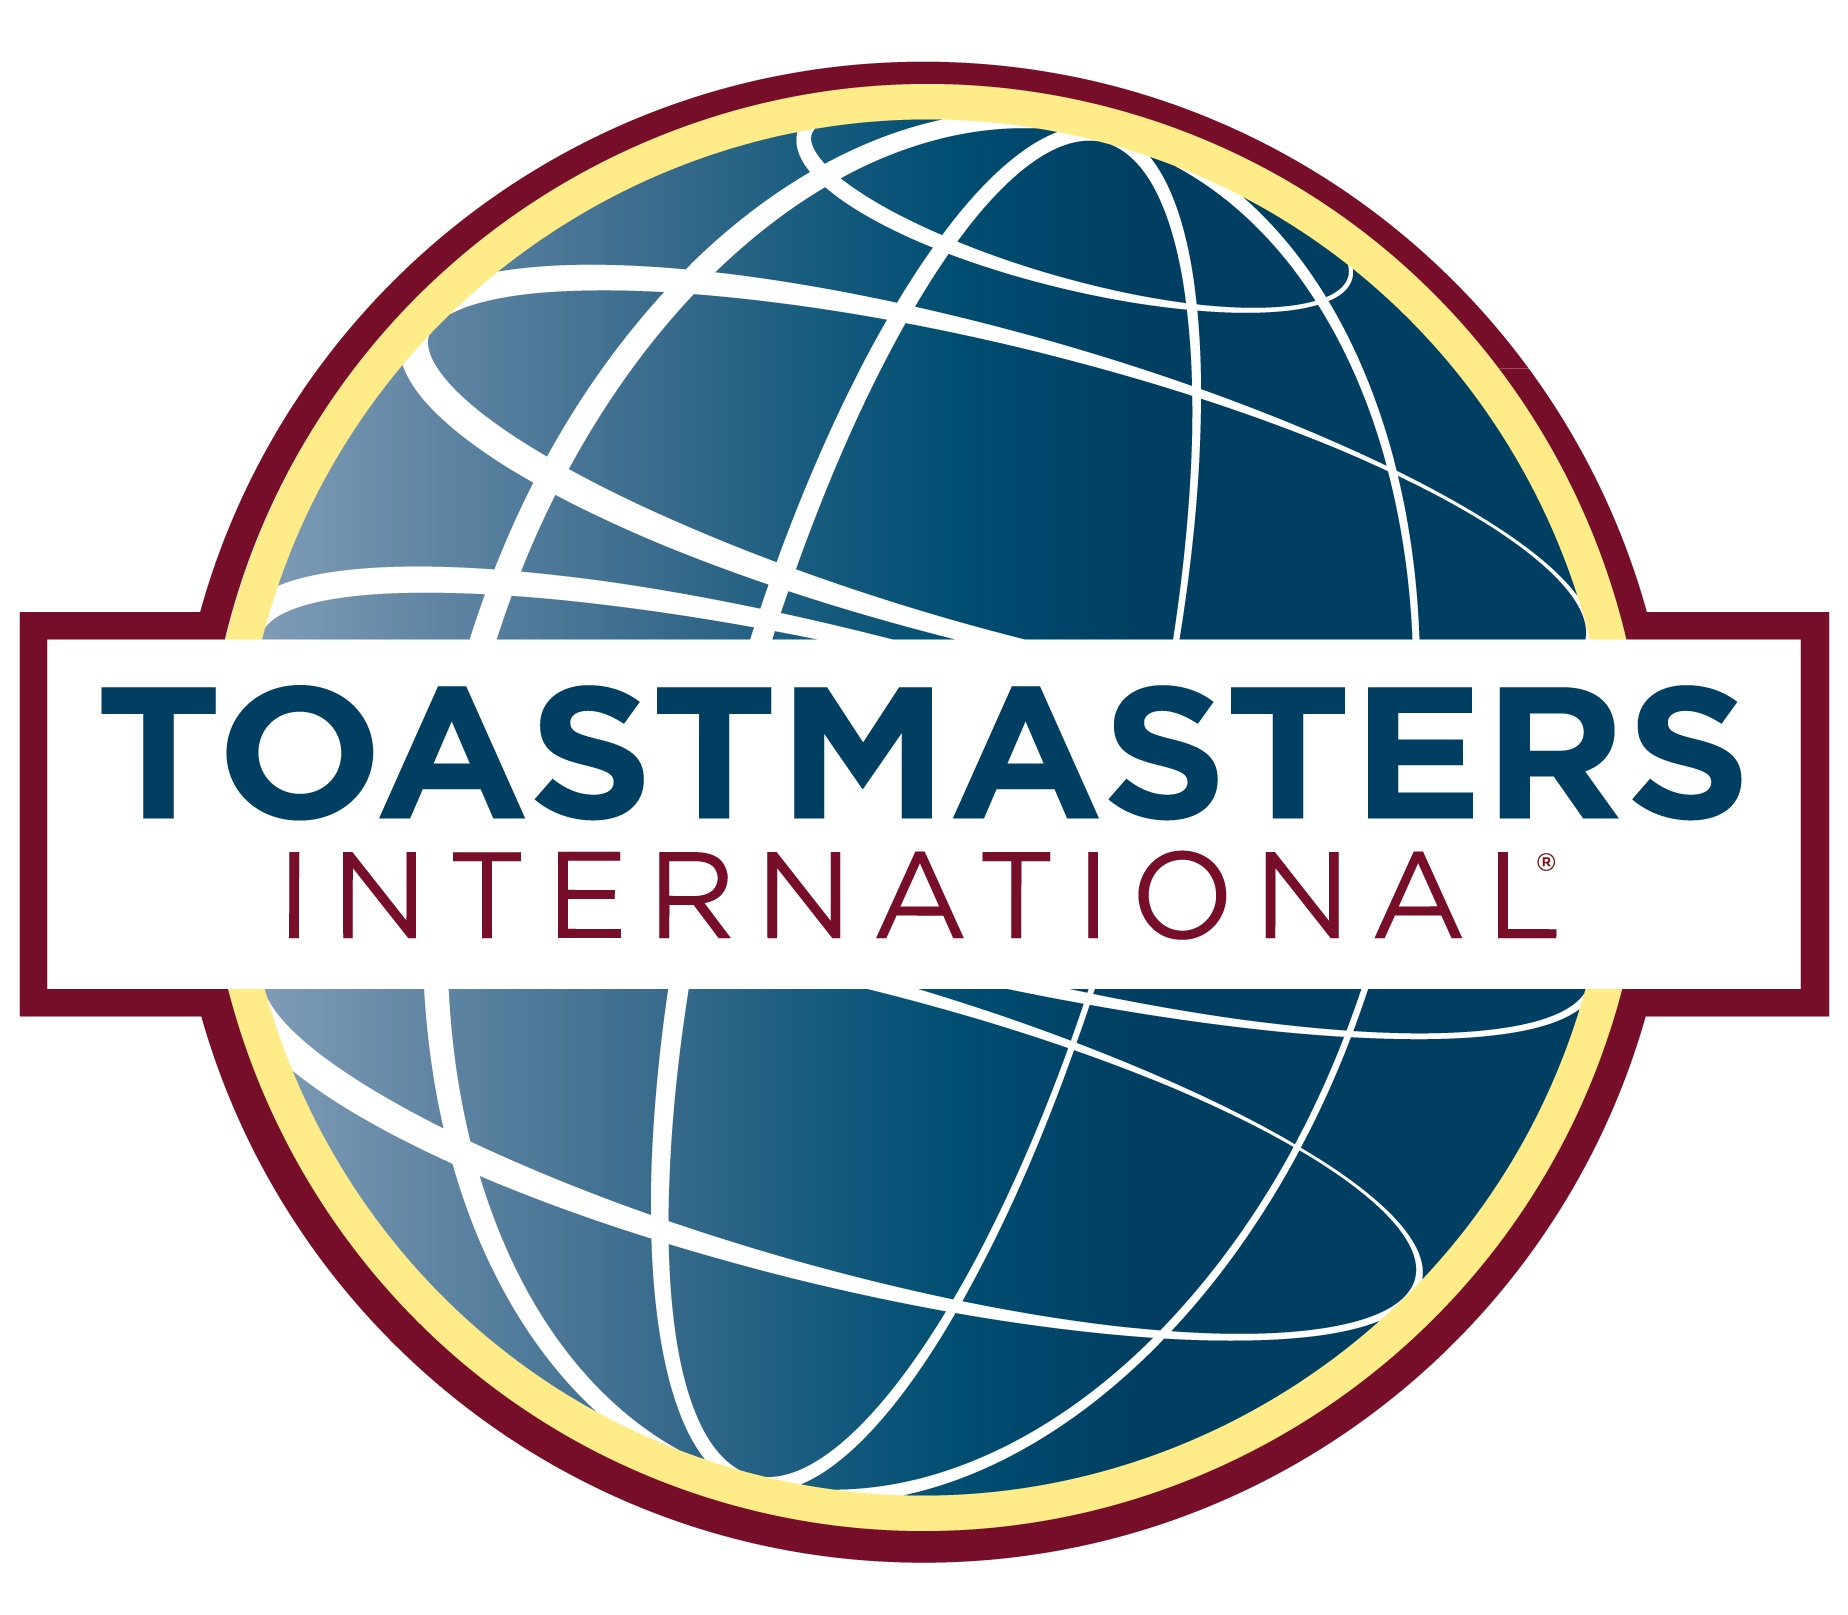 Toastmasters International is a nonprofit educational organization that teaches public speaking and leadership skills through a worldwide network of meeting locations.